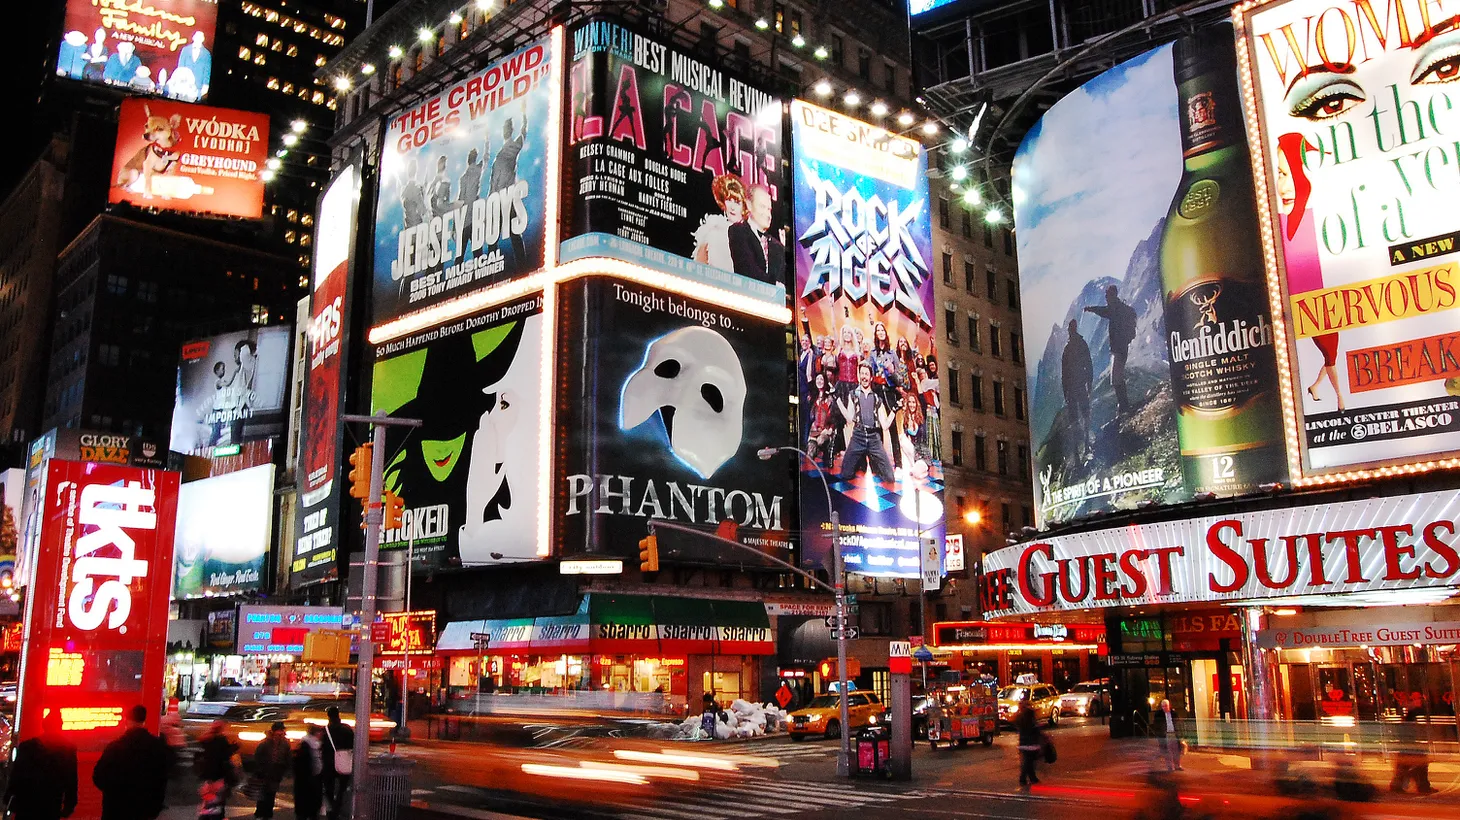 Nighttime in Times Square in New York City featuring billboards of Broadway shows on December 11, 2010.